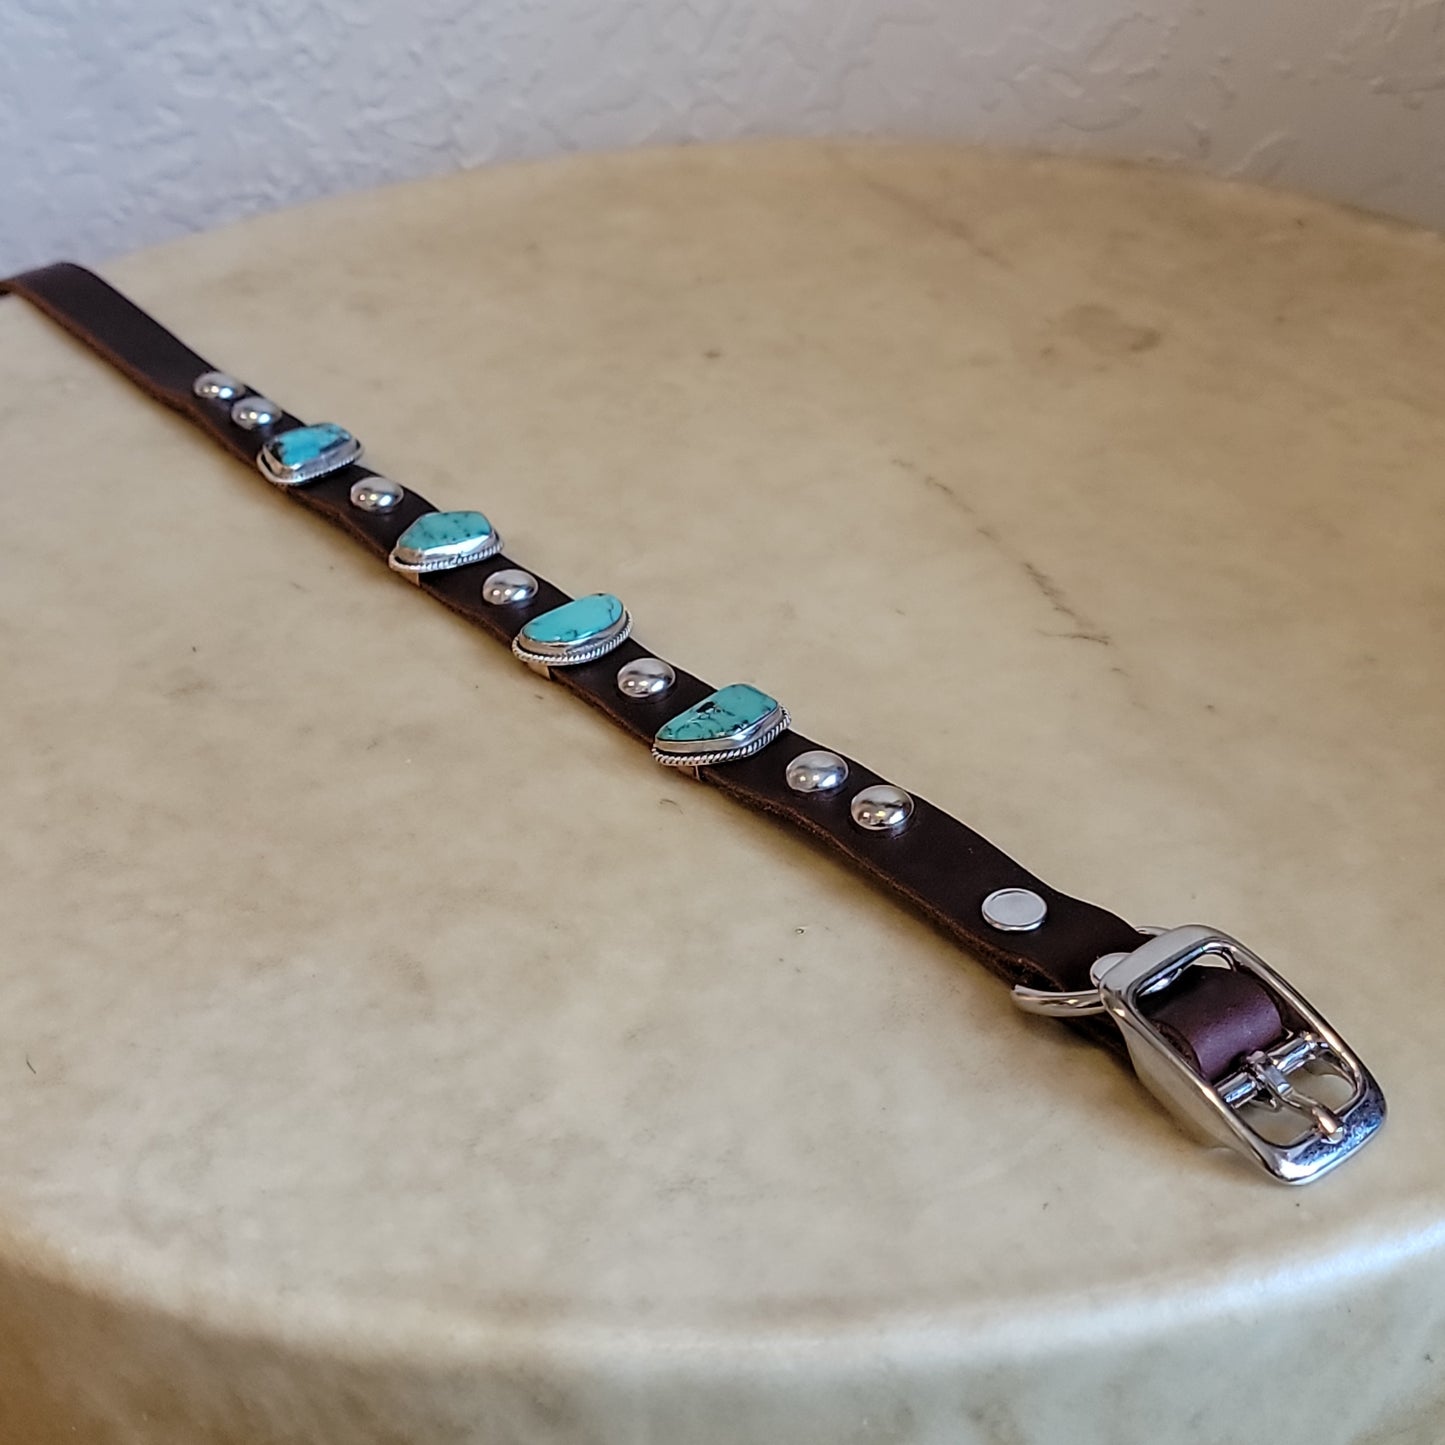 Sterling Silver with Turquoise on Leather Dog Collar/ Dog Jewelry